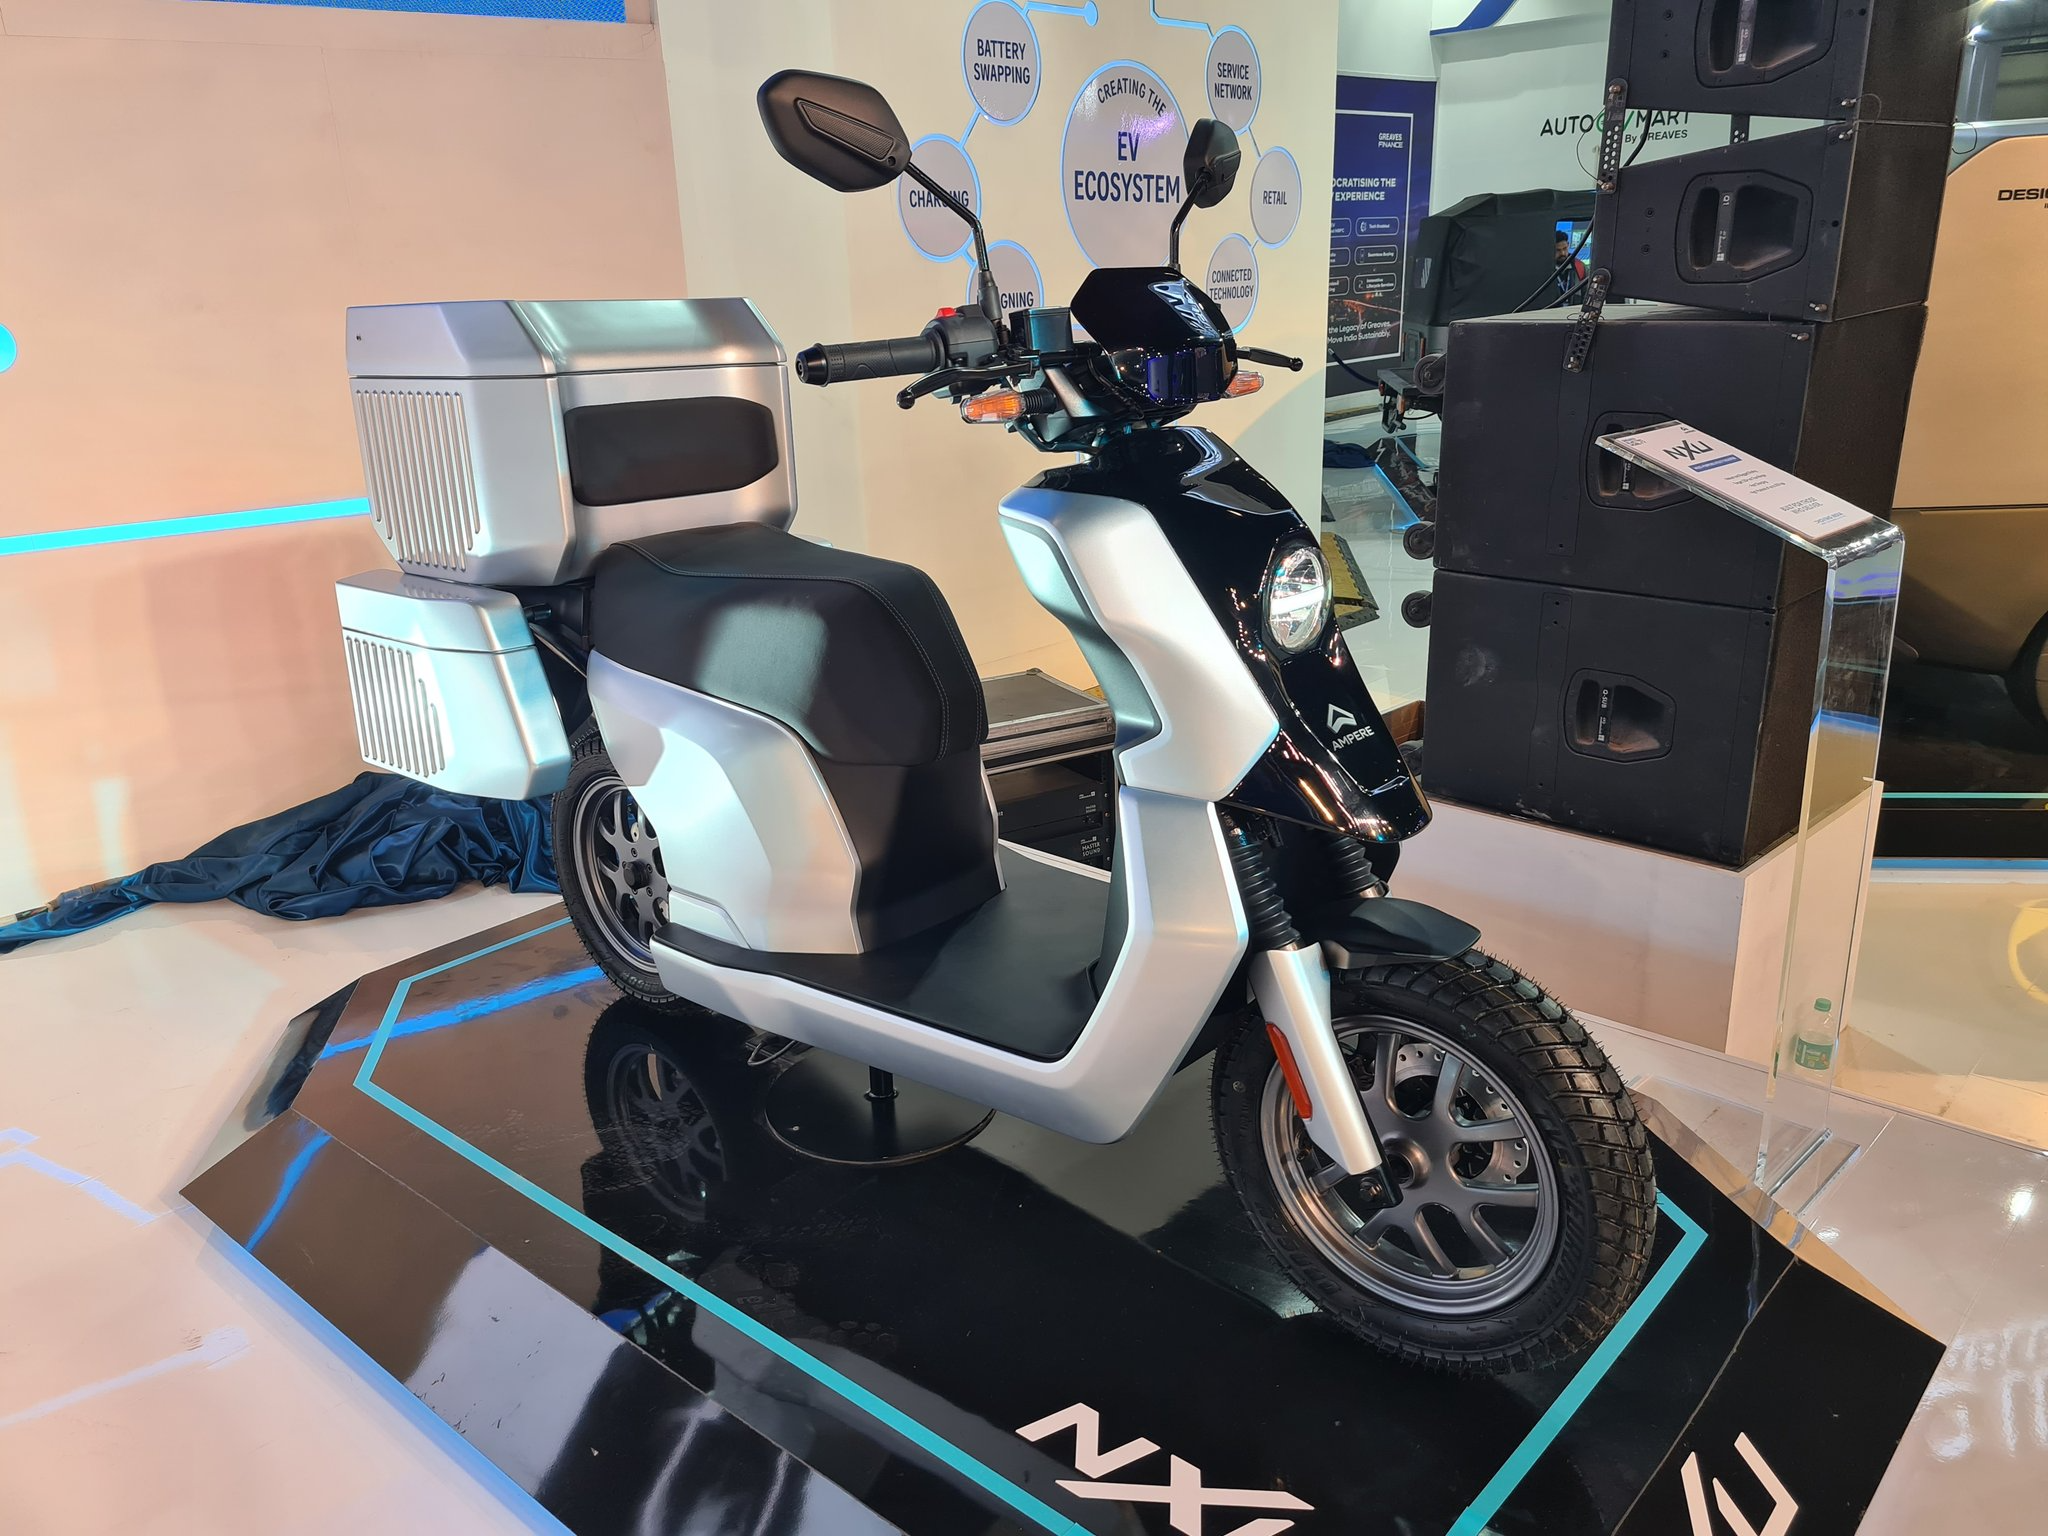 https://e-vehicleinfo.com/greaves-electric-launched-5-new-evs-electric-scooter-primus-nxg-and-nxu-e3w-aero-vision-elp-and-elc/